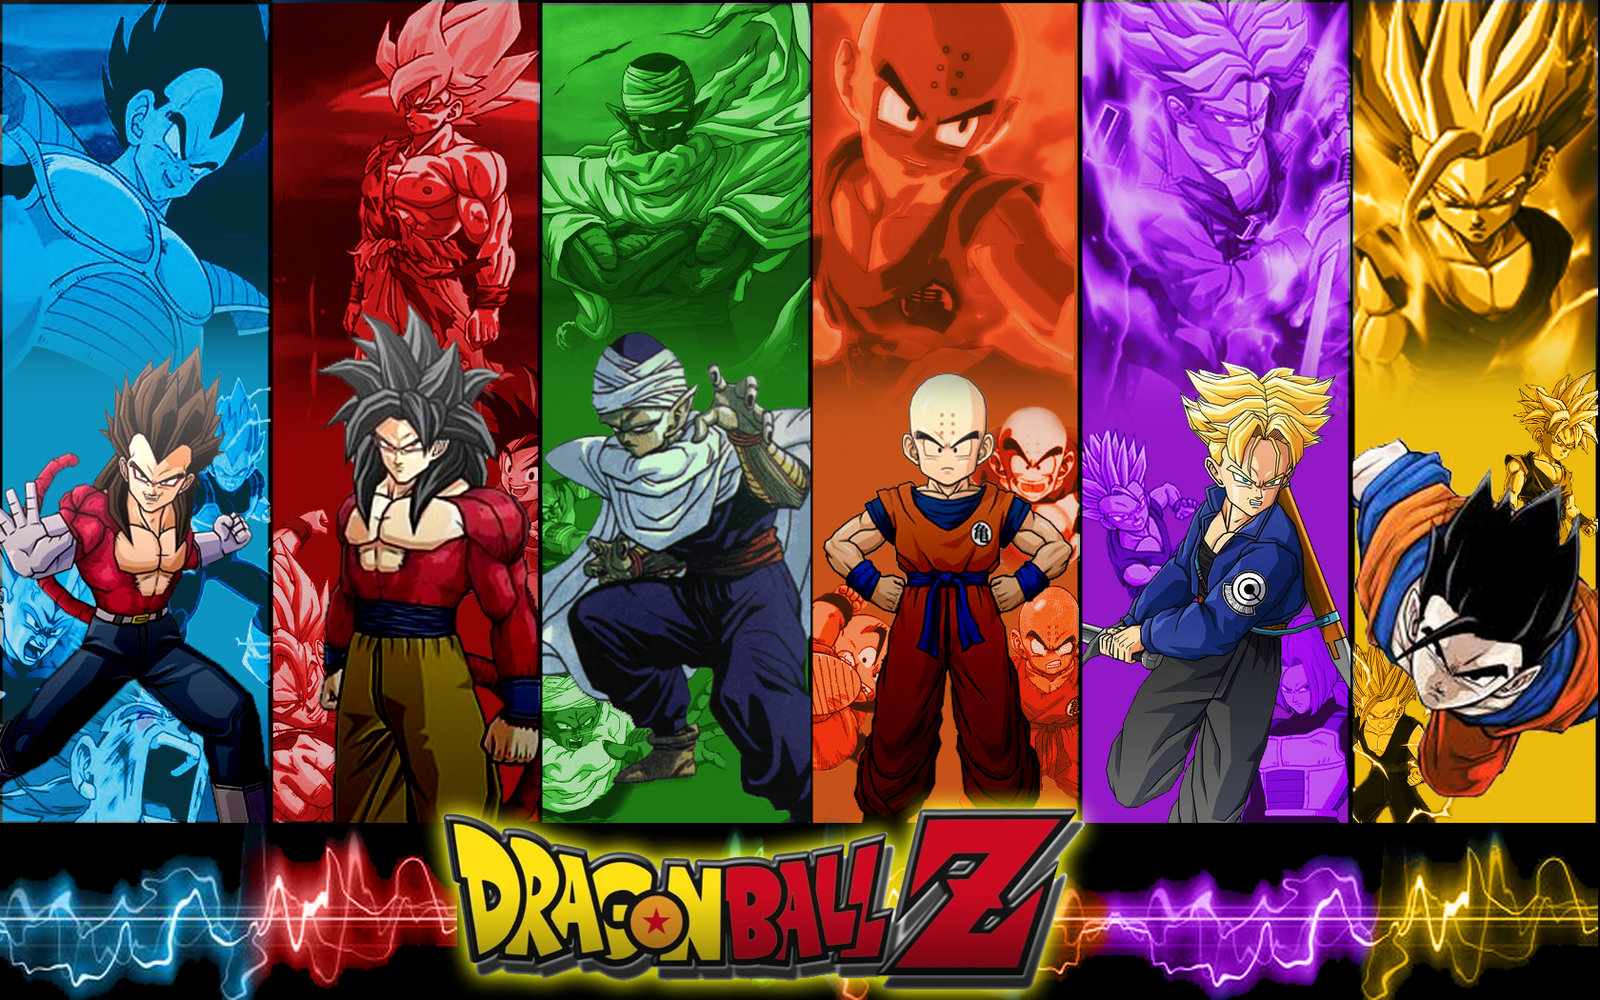 perfect-cell-dragon-ball-z-iphone-wallpaper-dbz-characters-cell